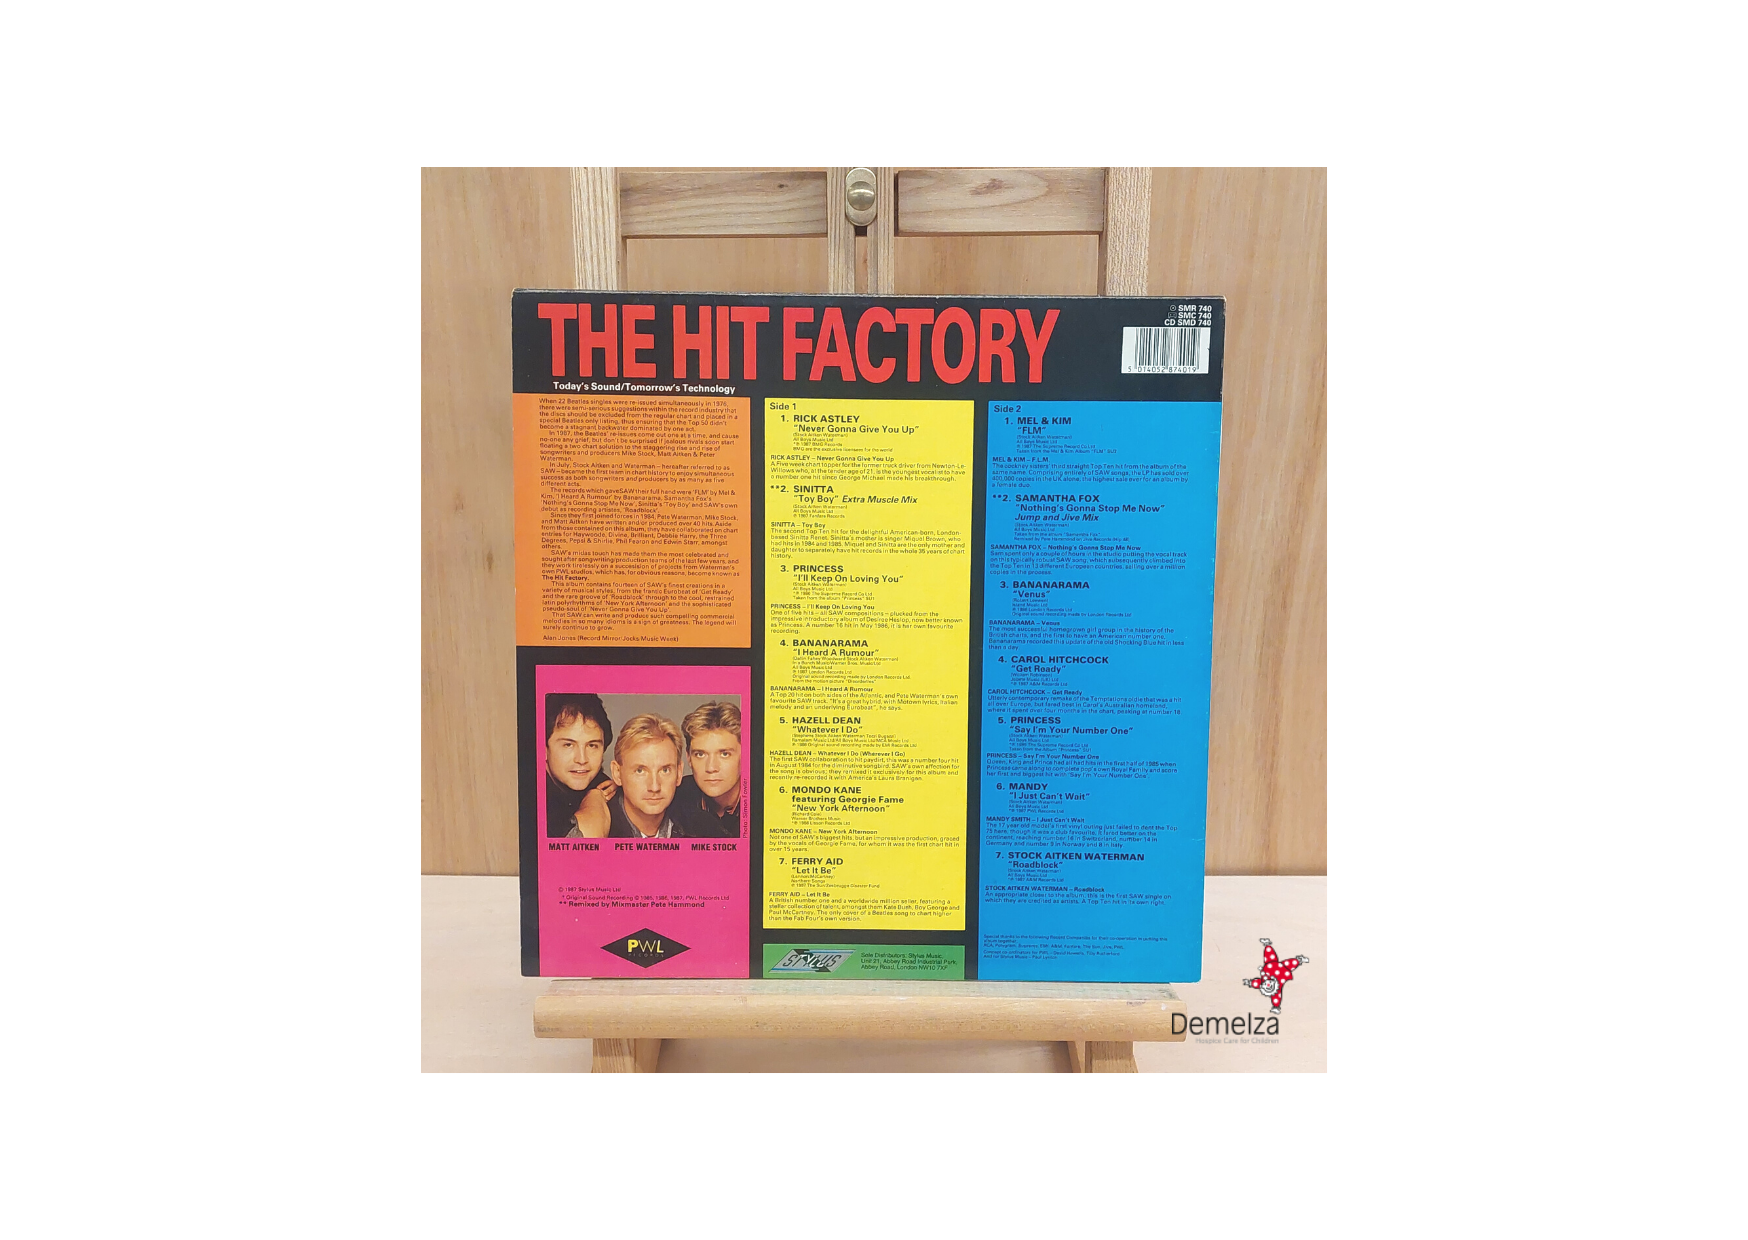 Back of The Hit Factory cover